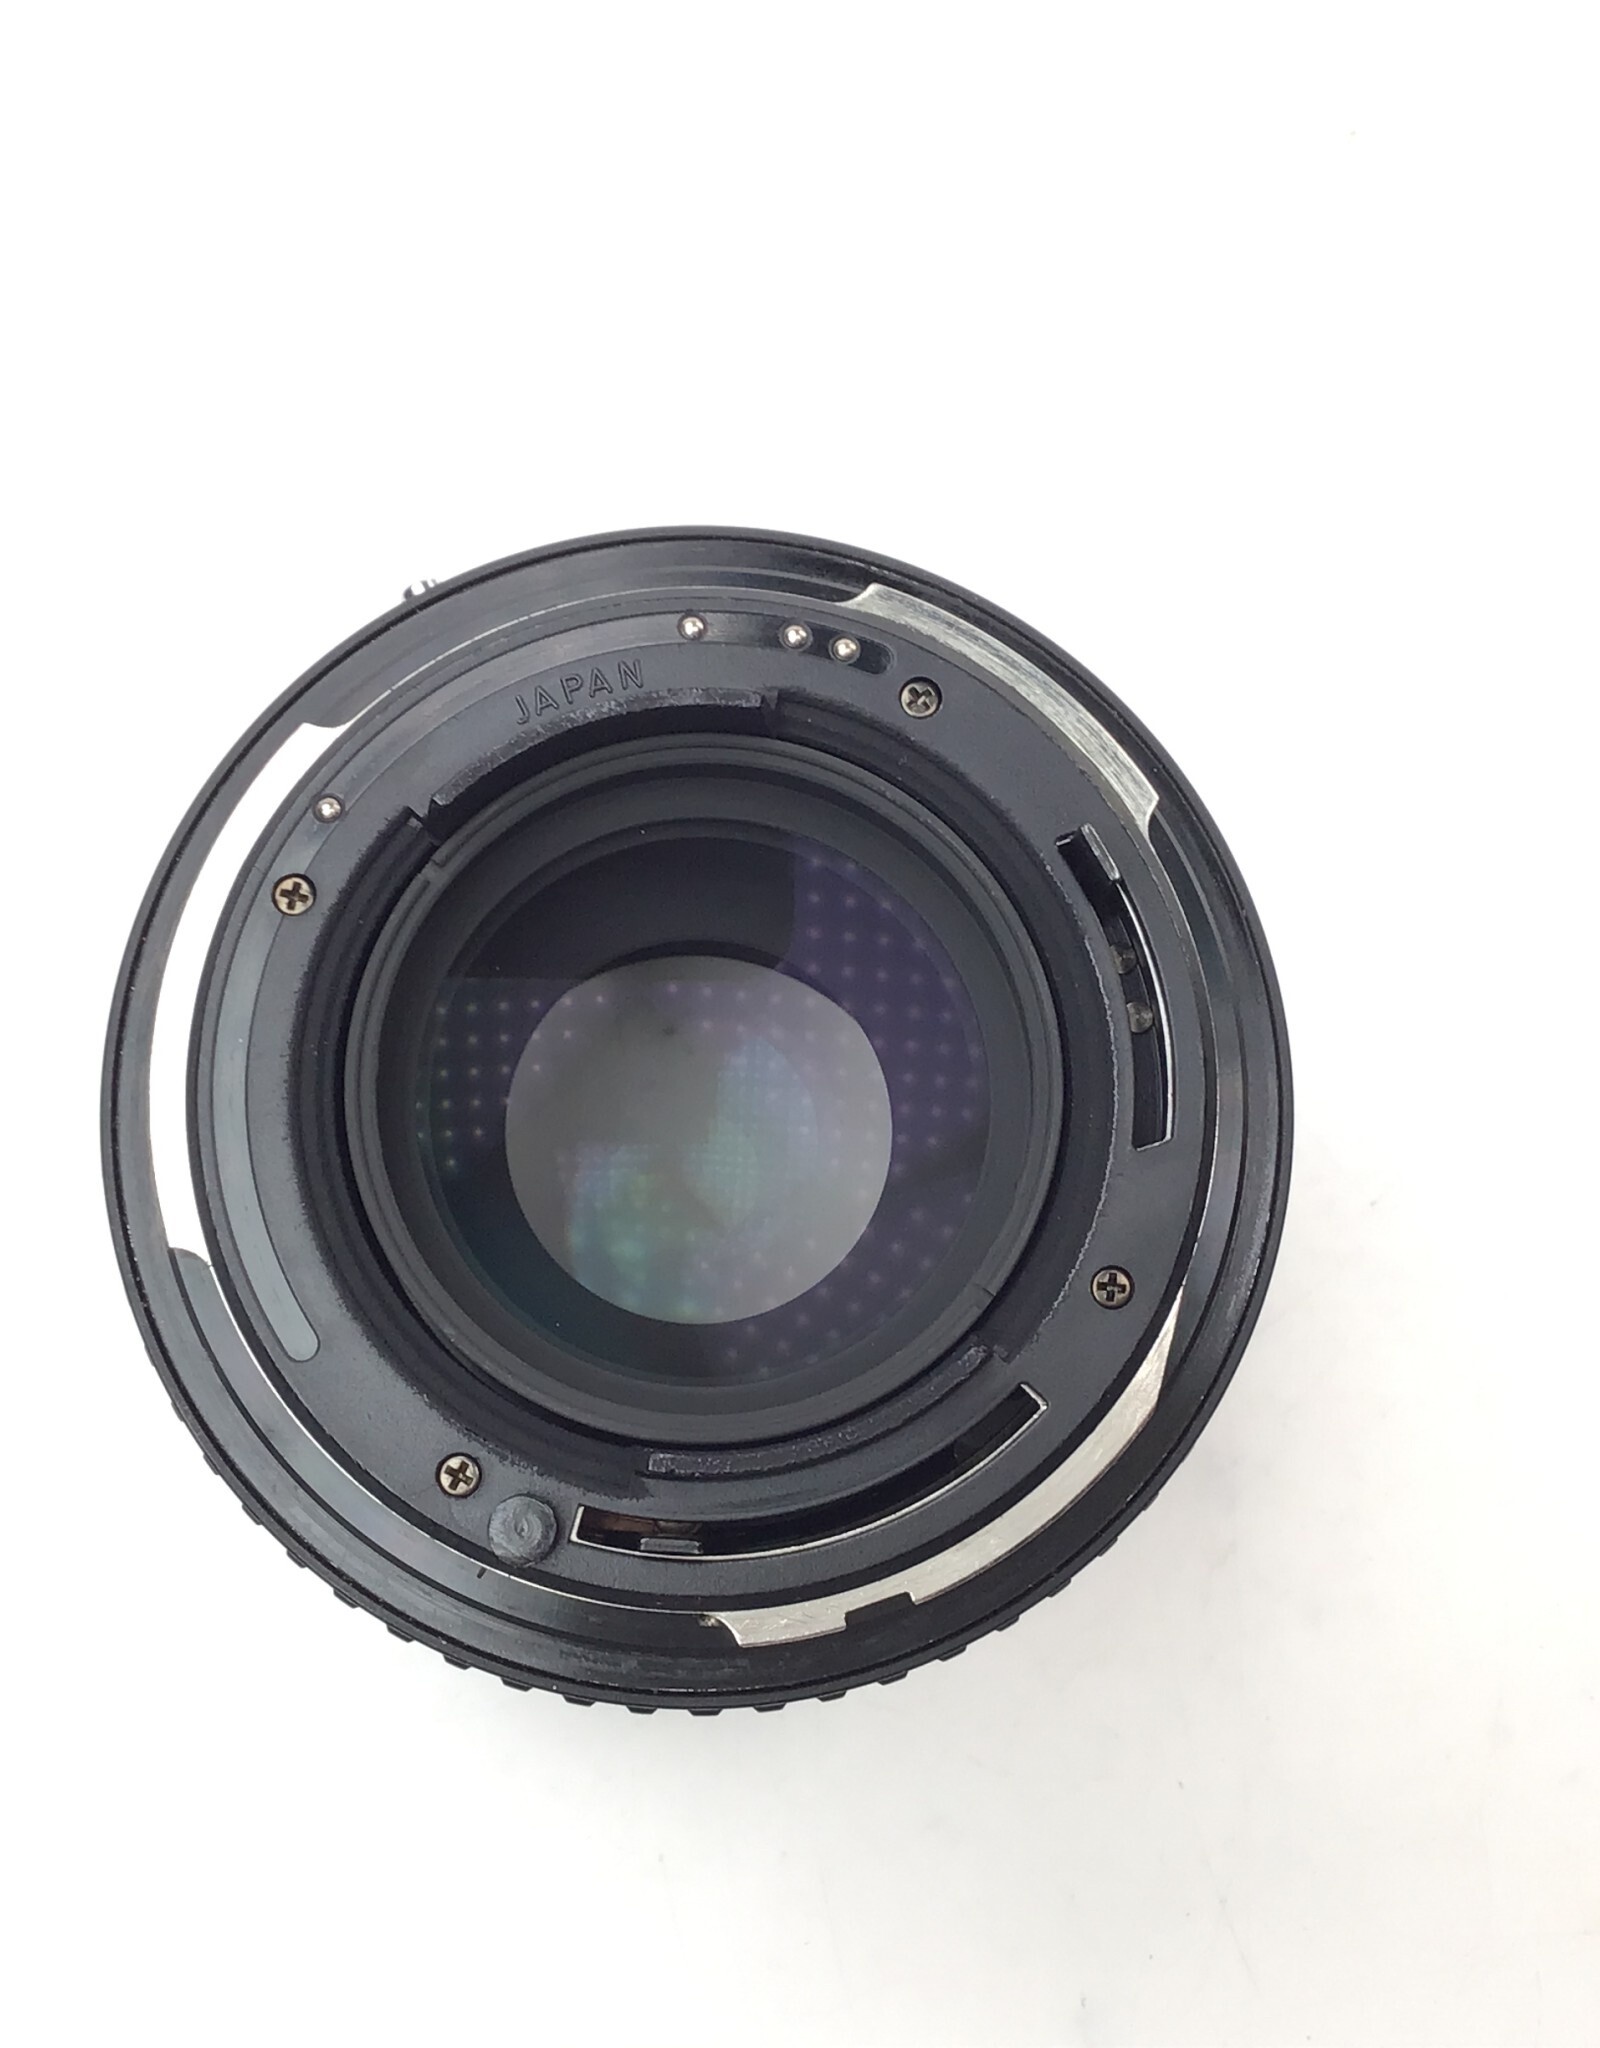 Pentax Pentax A SMC 150mm f3.5 Lens for 645 Used Good